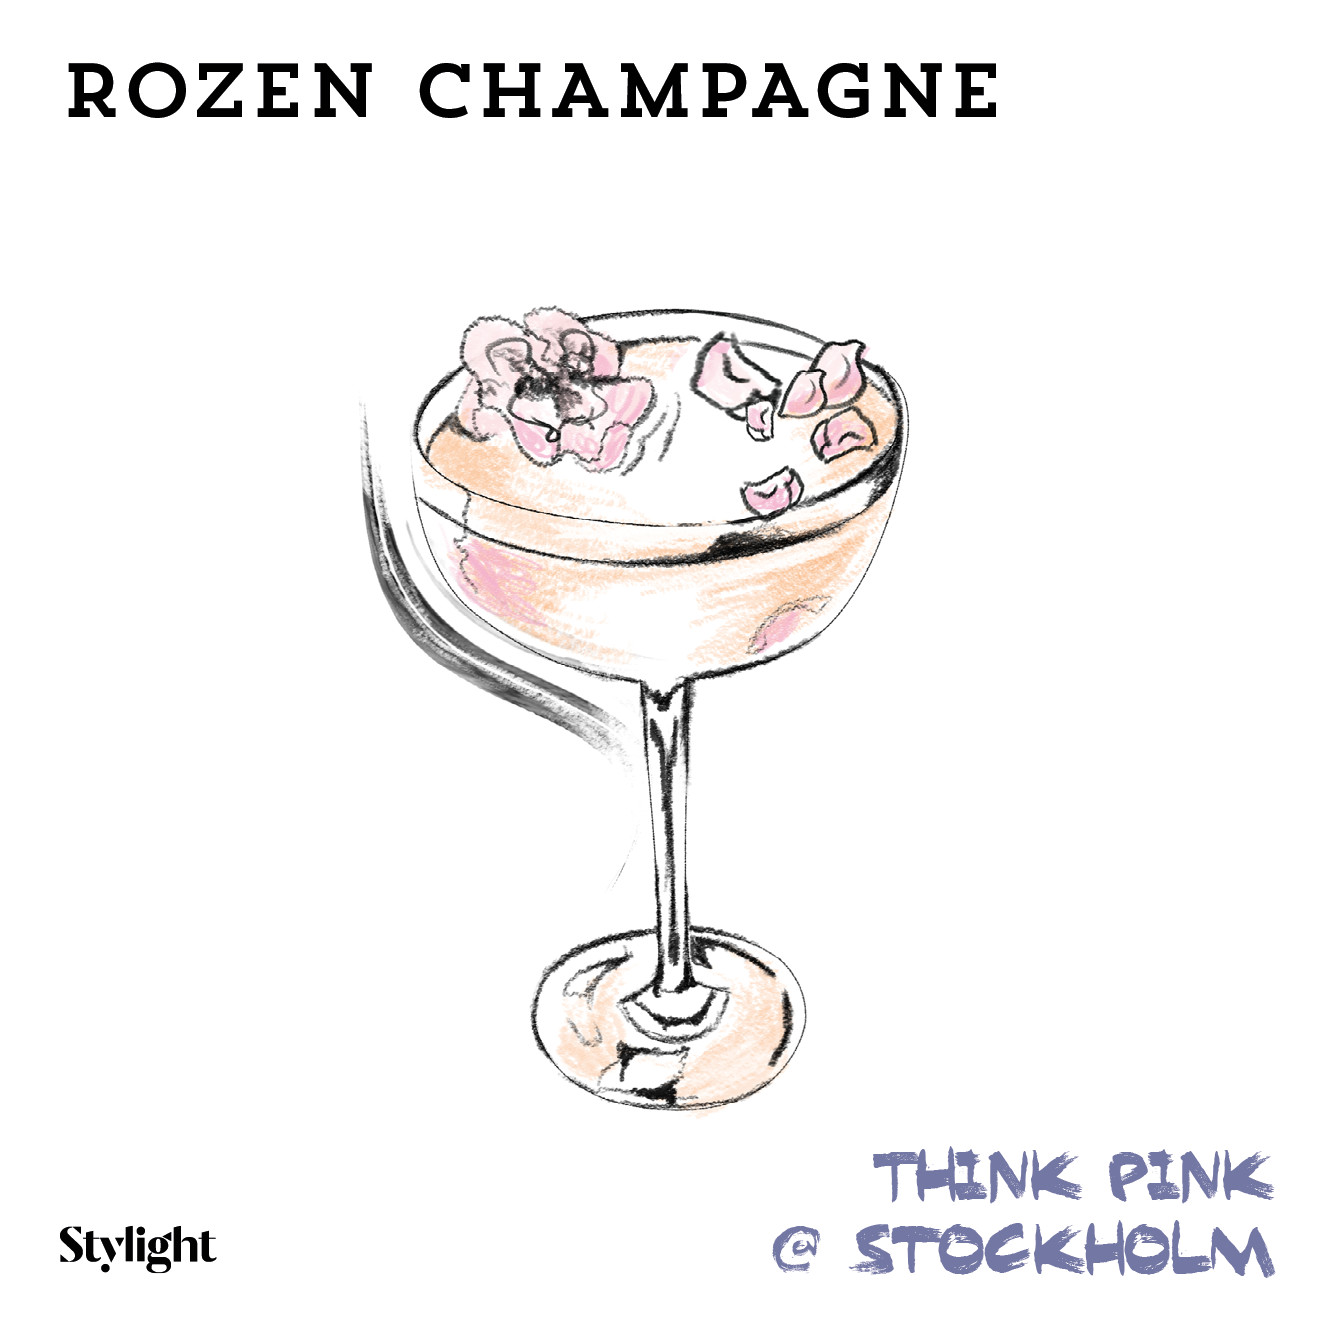 Stockholm cocktail rose champagne Stylight